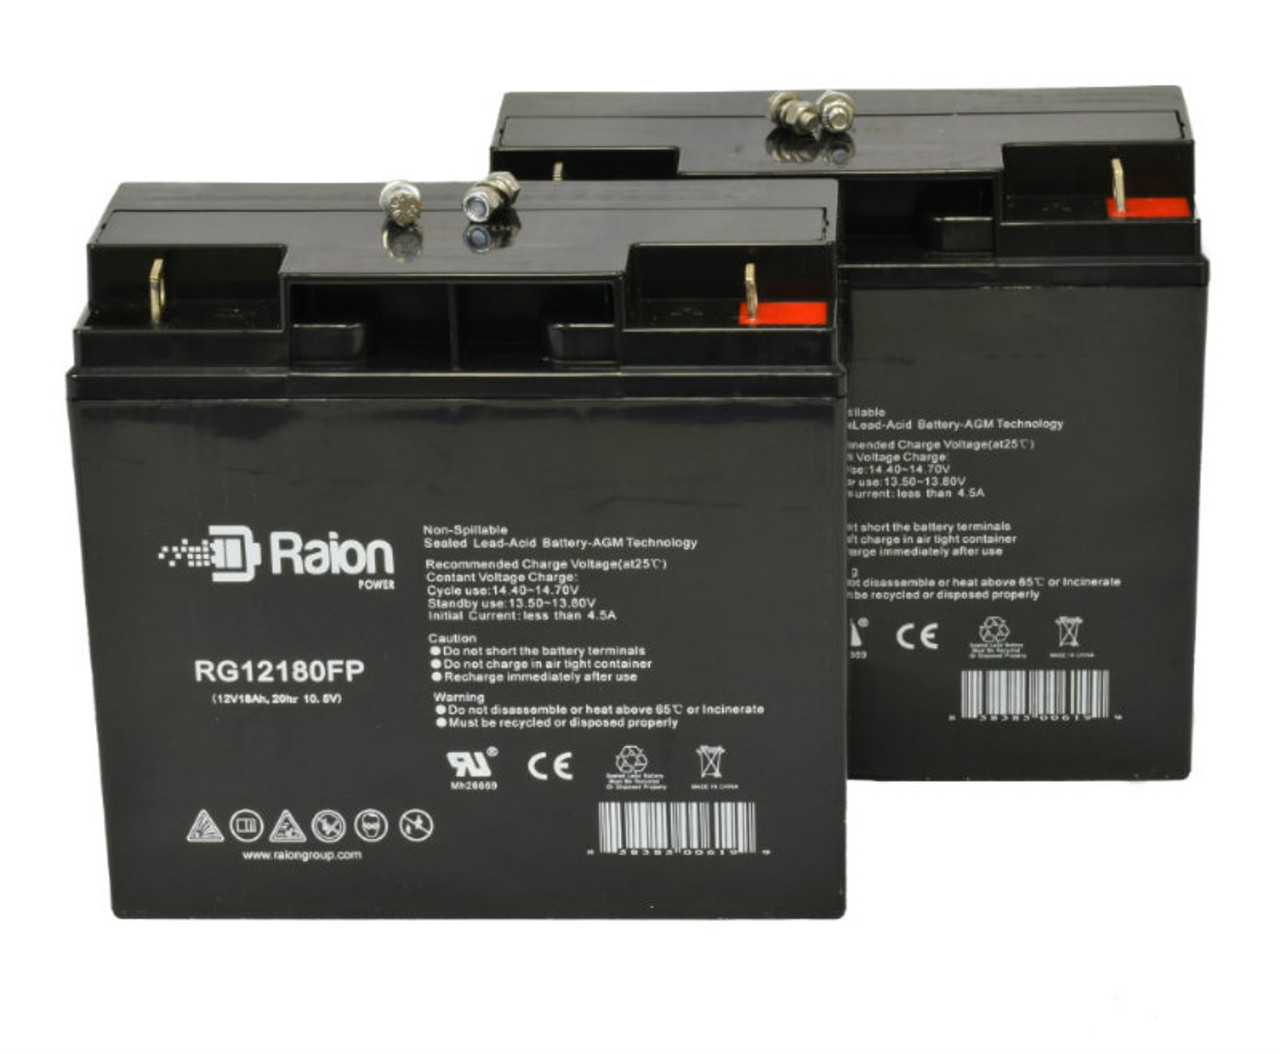 Raion Power Replacement RG12180FP 12V 18Ah Emergency Light Battery for Big Beam 2IL24S15 - 2 Pack